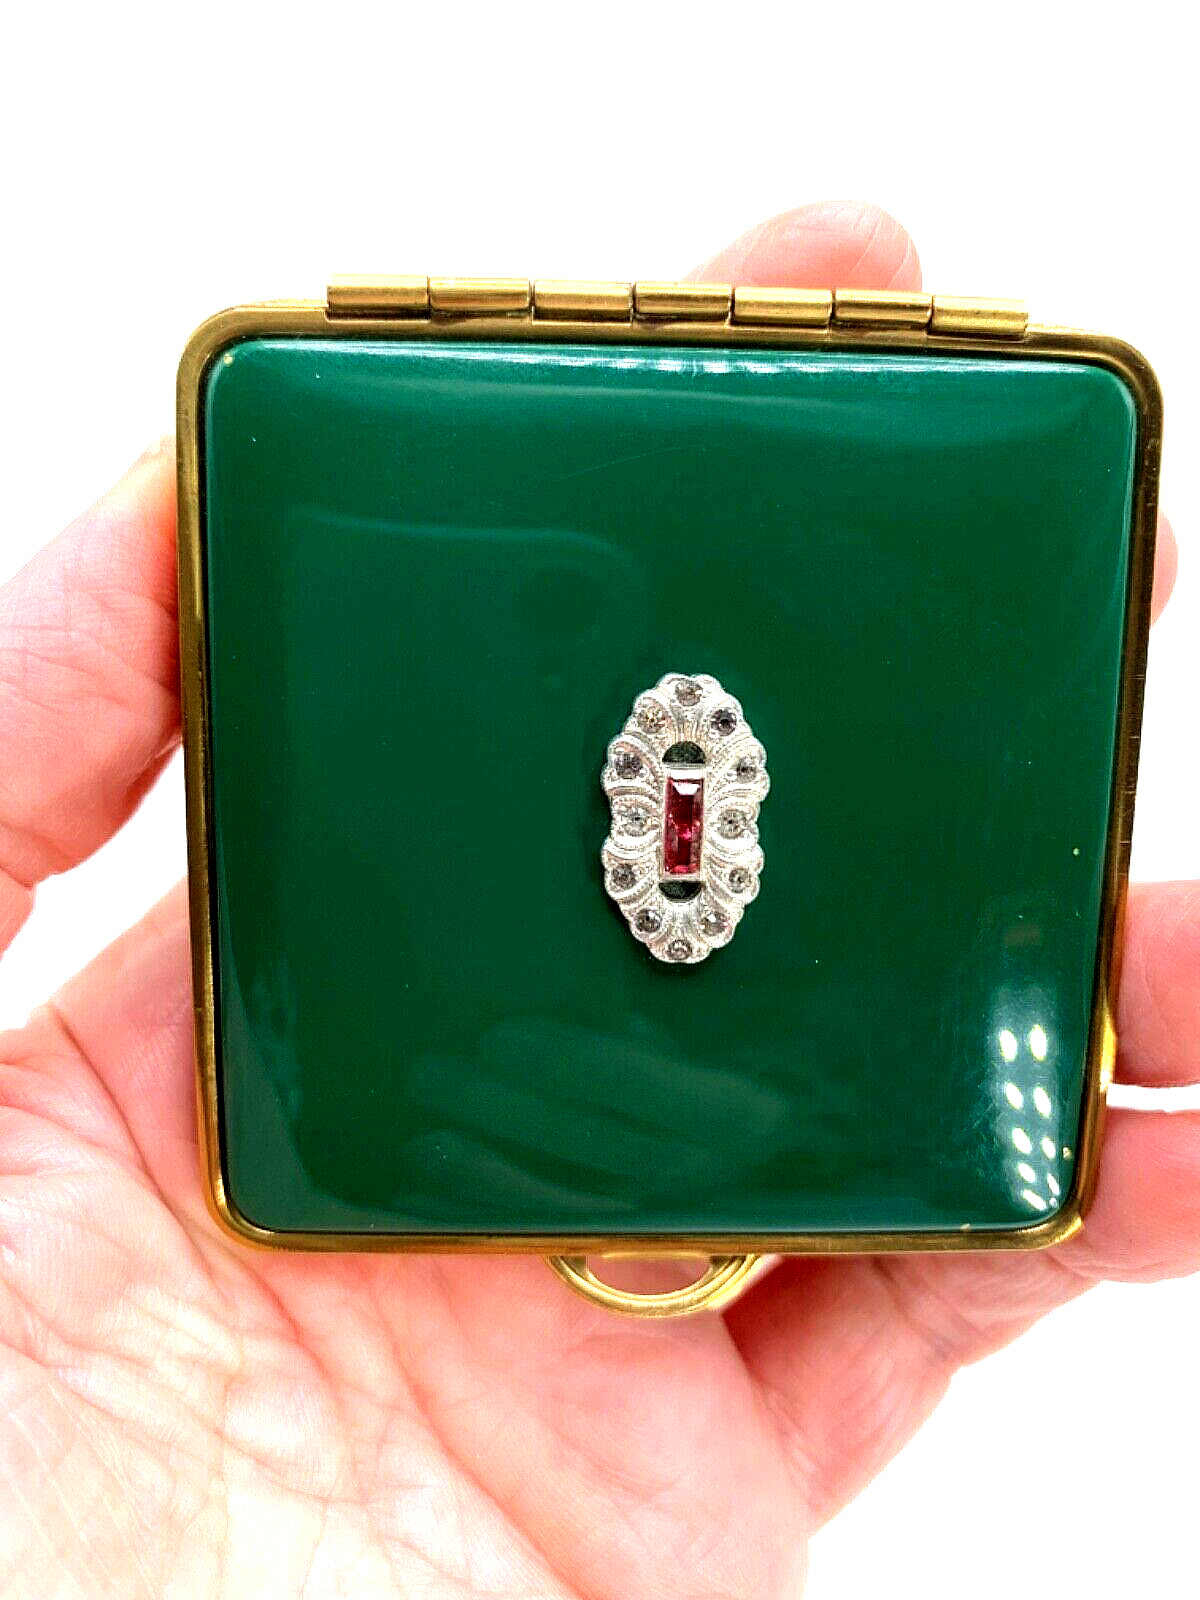 Elegant  VTG compact. FMCO? Lampl? Powder, rouge compartments  Mid-Century.